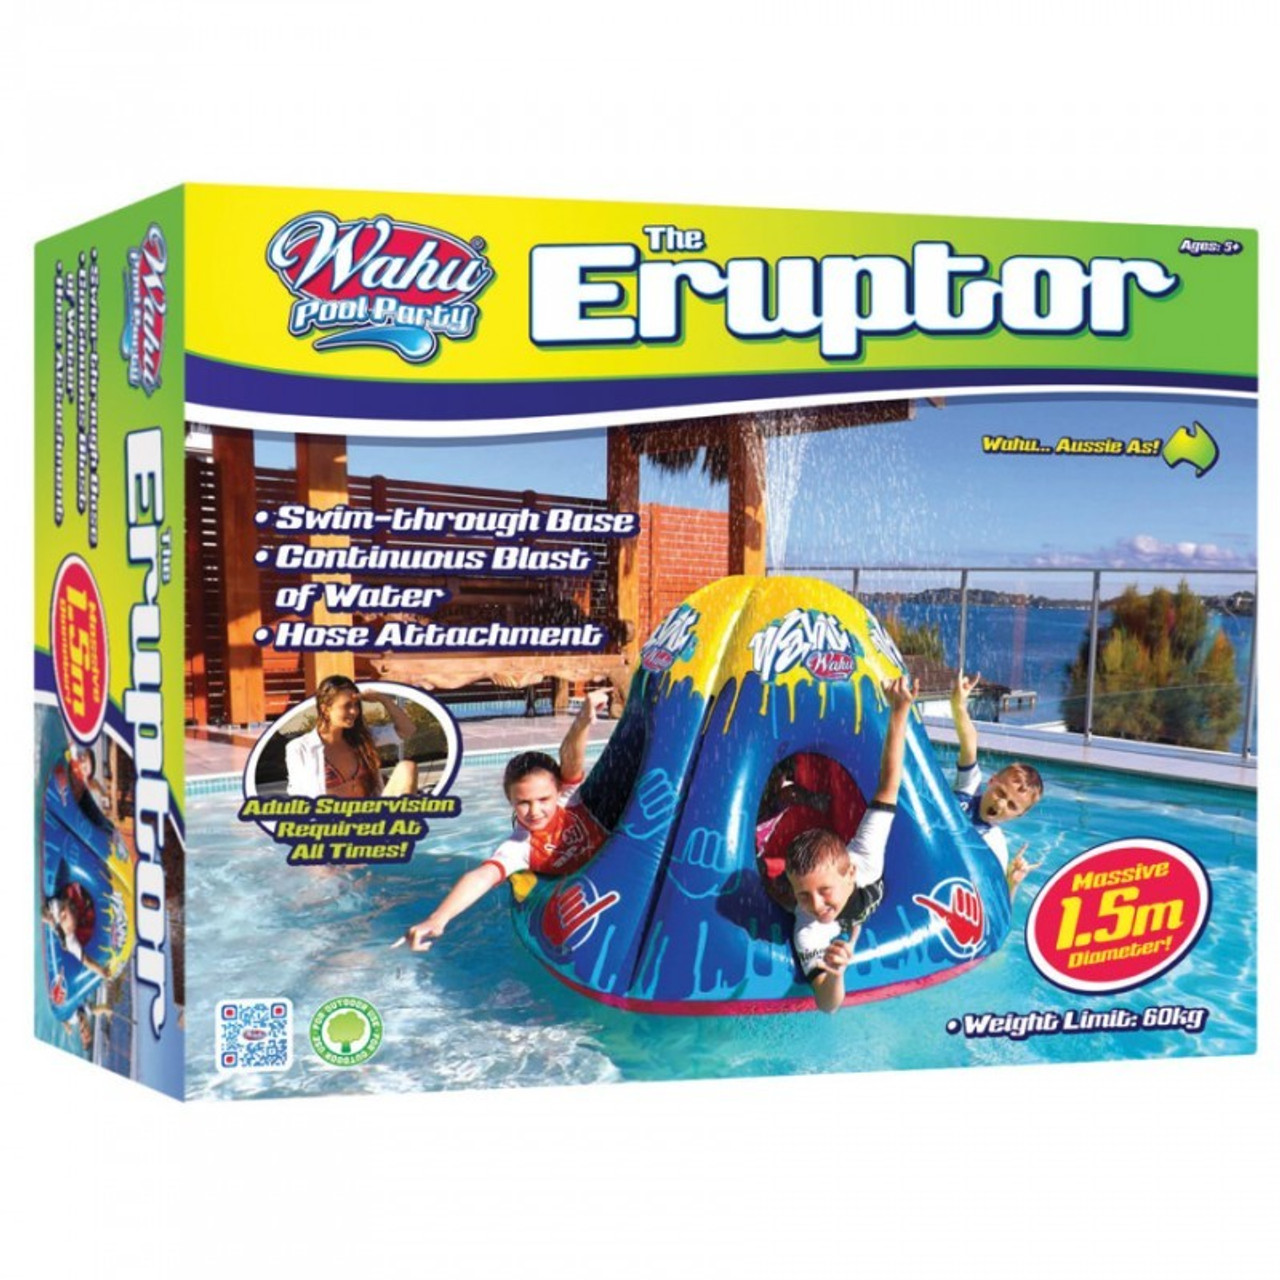 WAHU POOL PARTY THE ERUPTOR